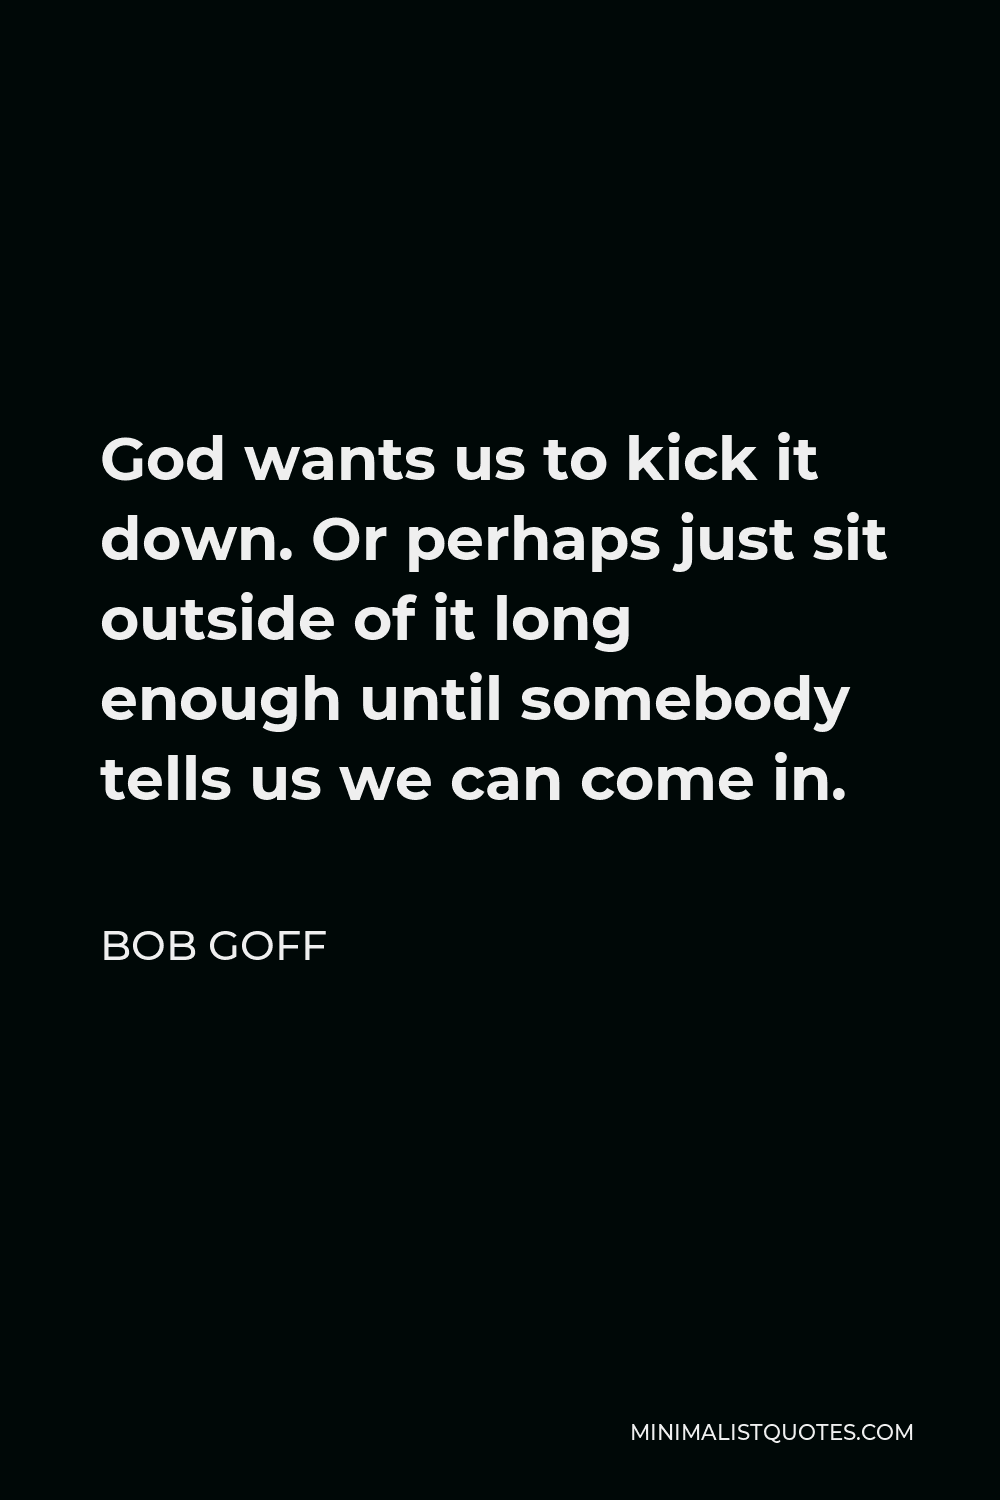 Bob Goff Quote - God wants us to kick it down. Or perhaps just sit outside of it long enough until somebody tells us we can come in.